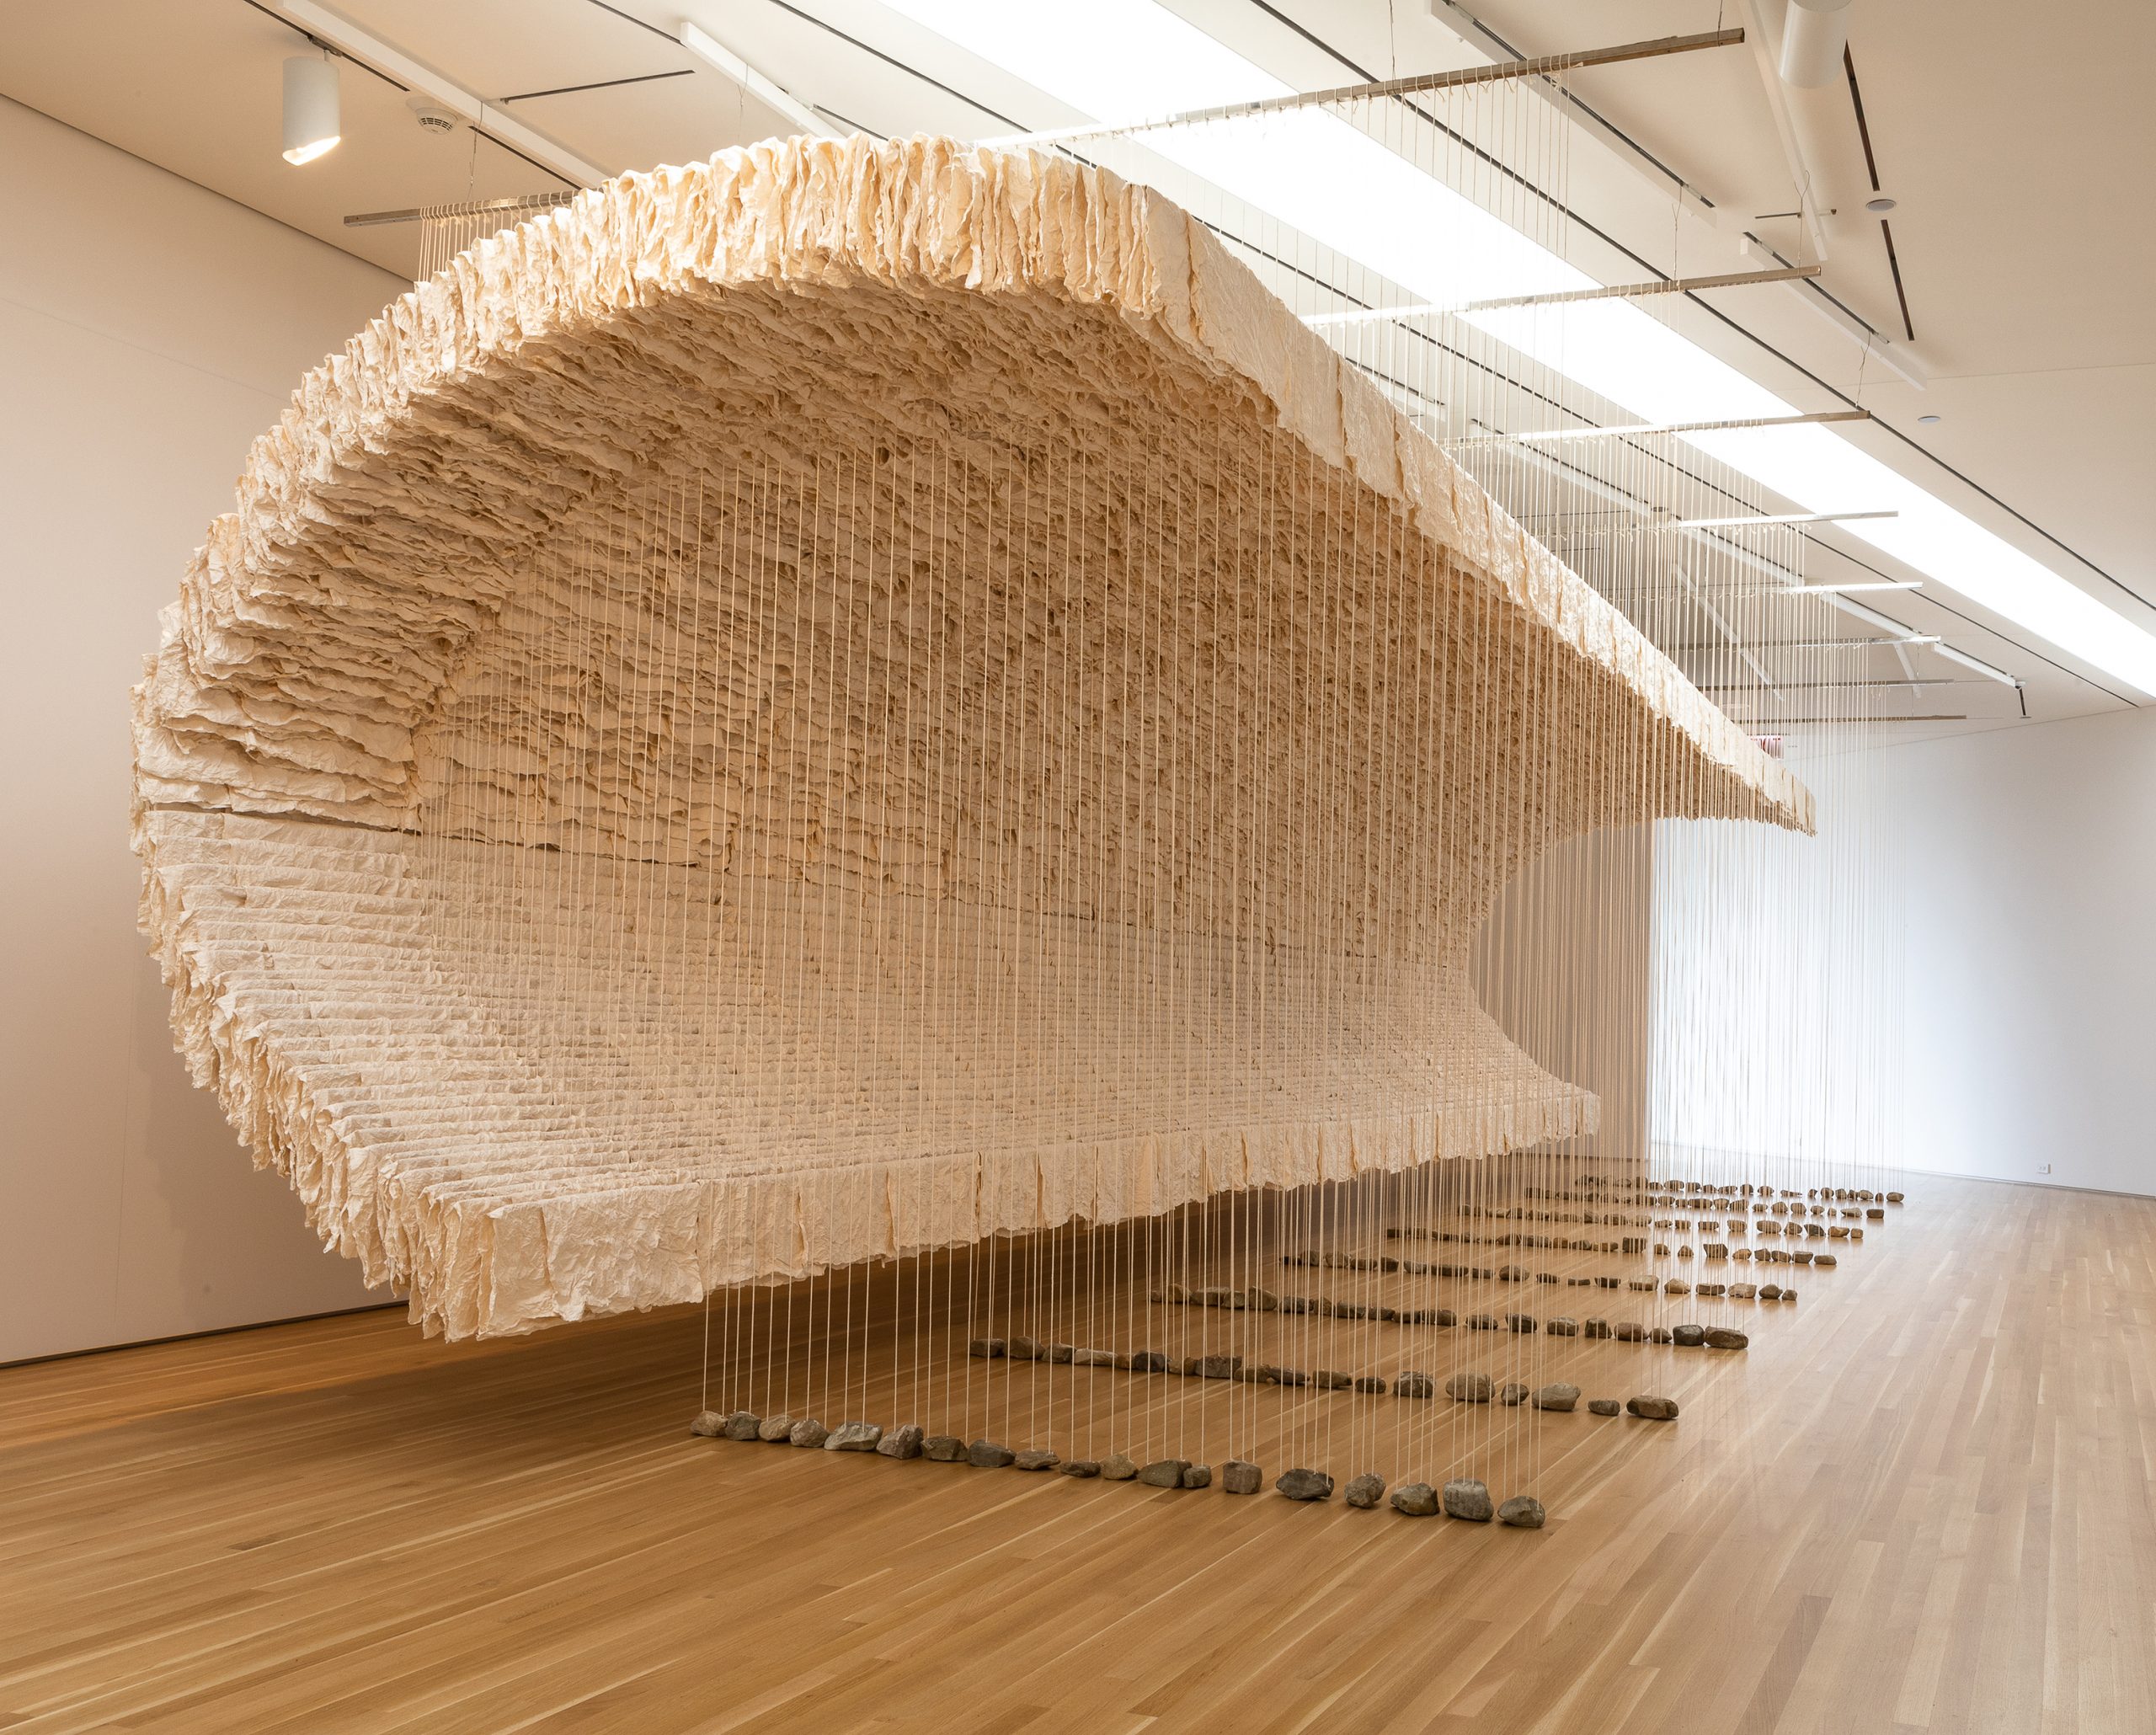 Zhu Jinshi, Wave of Materials, 2007/2020. Installation view, The Allure of Matter: Material Art from China, Wrightwood 659.